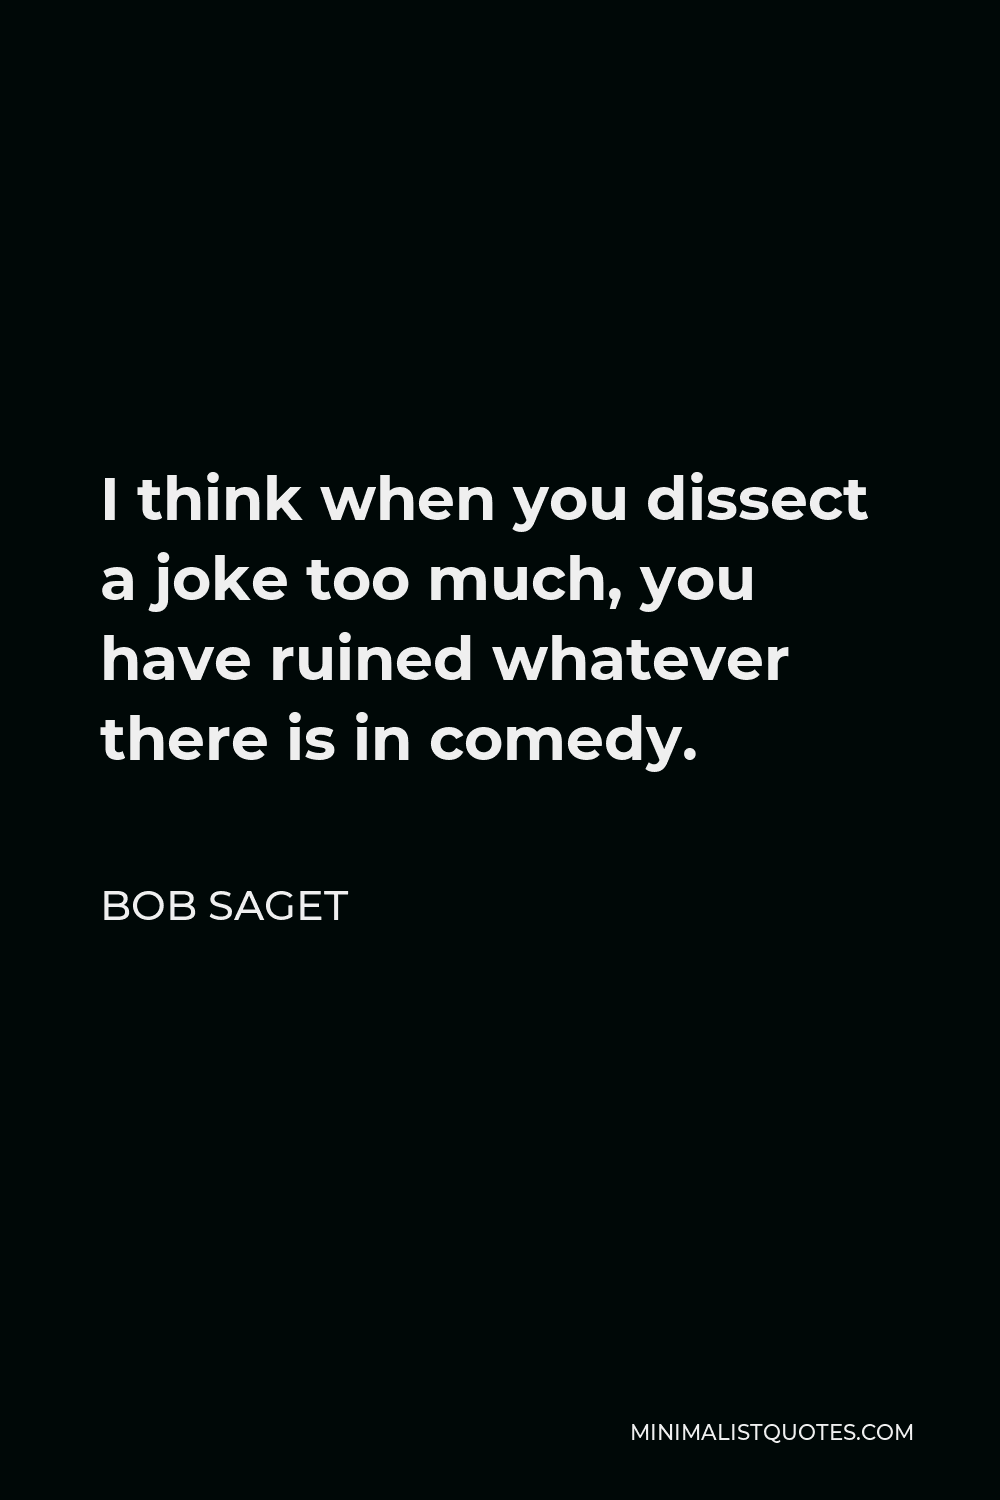 Bob Saget Quote - I think when you dissect a joke too much, you have ruined whatever there is in comedy.